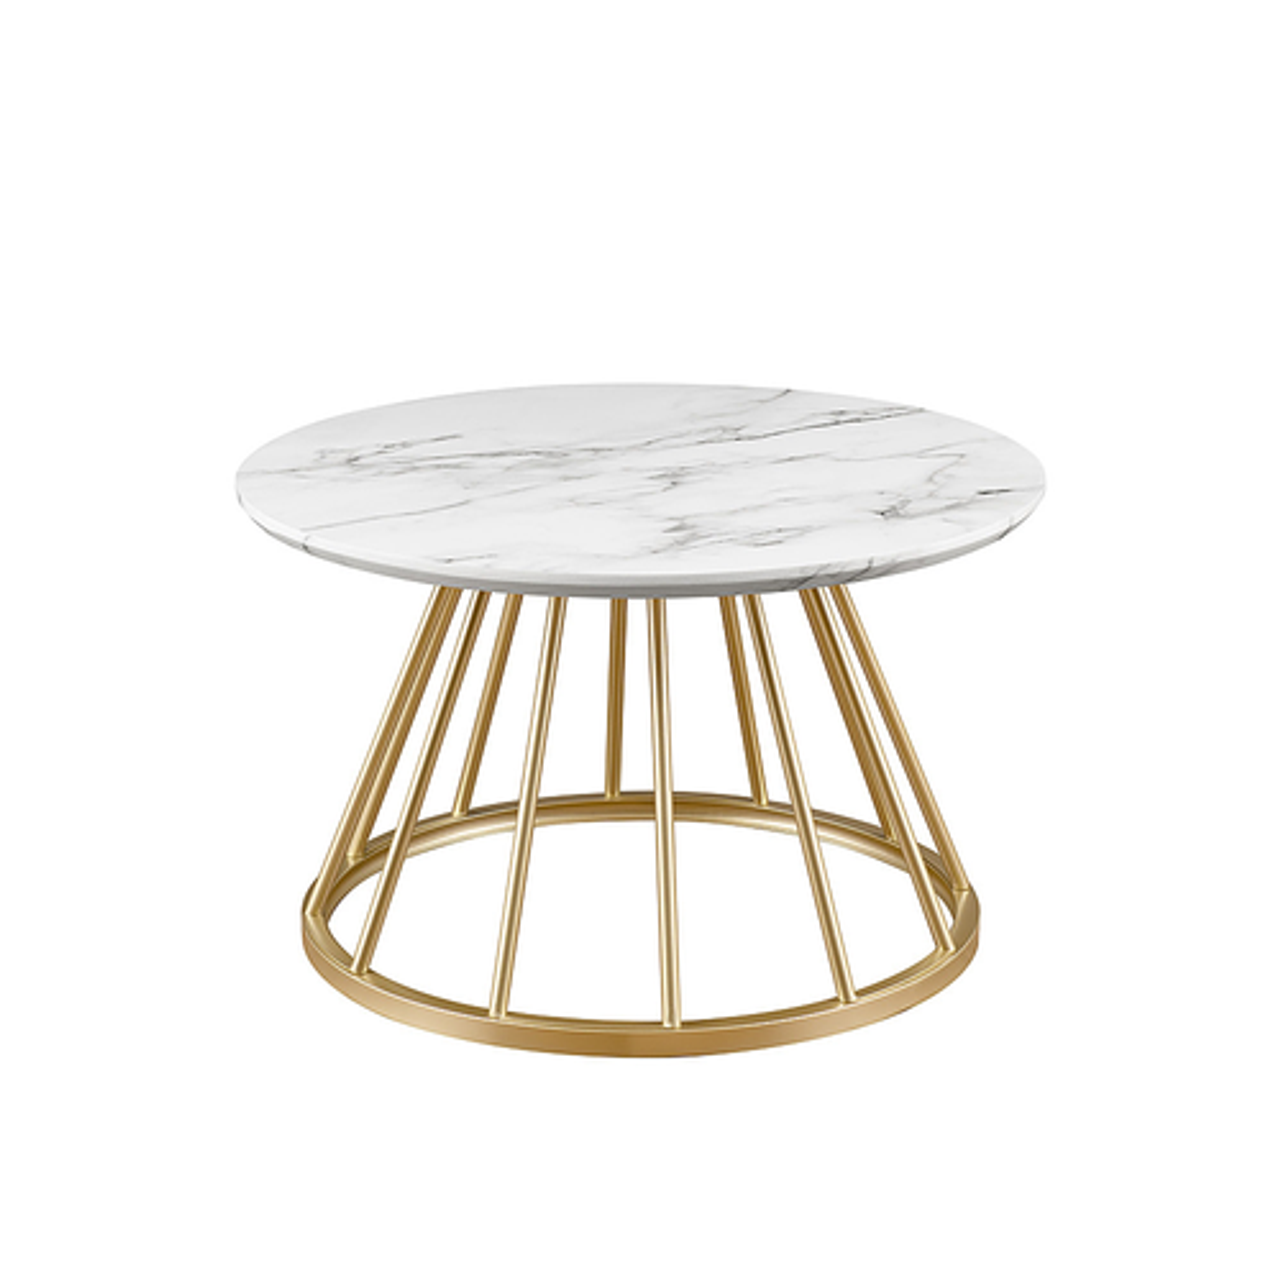 Walker Edison - Modern Cage-Base Coffee Table - Faux White Marble